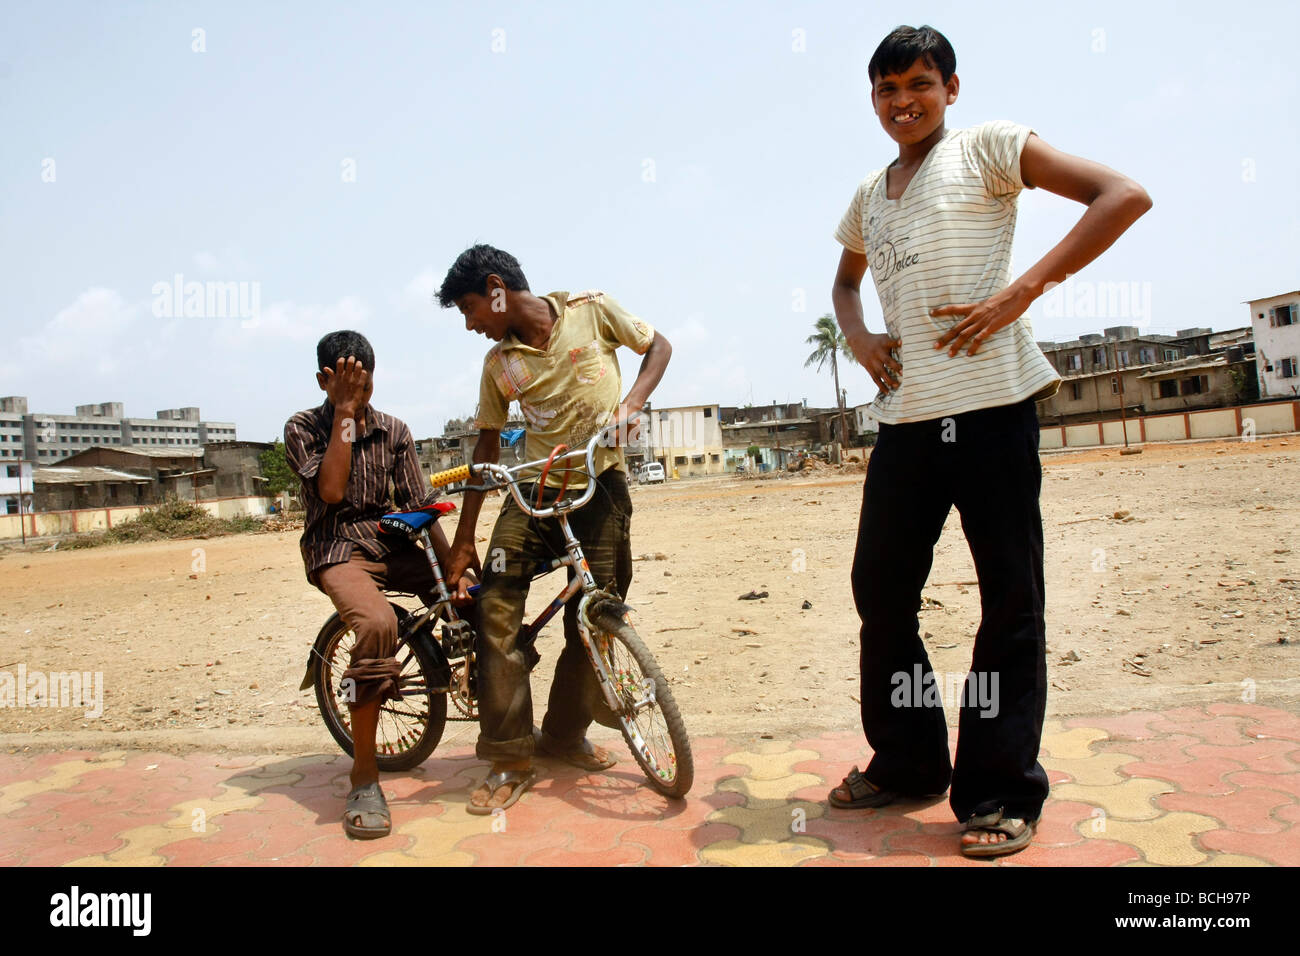 Boys ride a bicycle on a playground in the poor slum area of Dharavi in Mumbai (Bombay) in India. Stock Photo